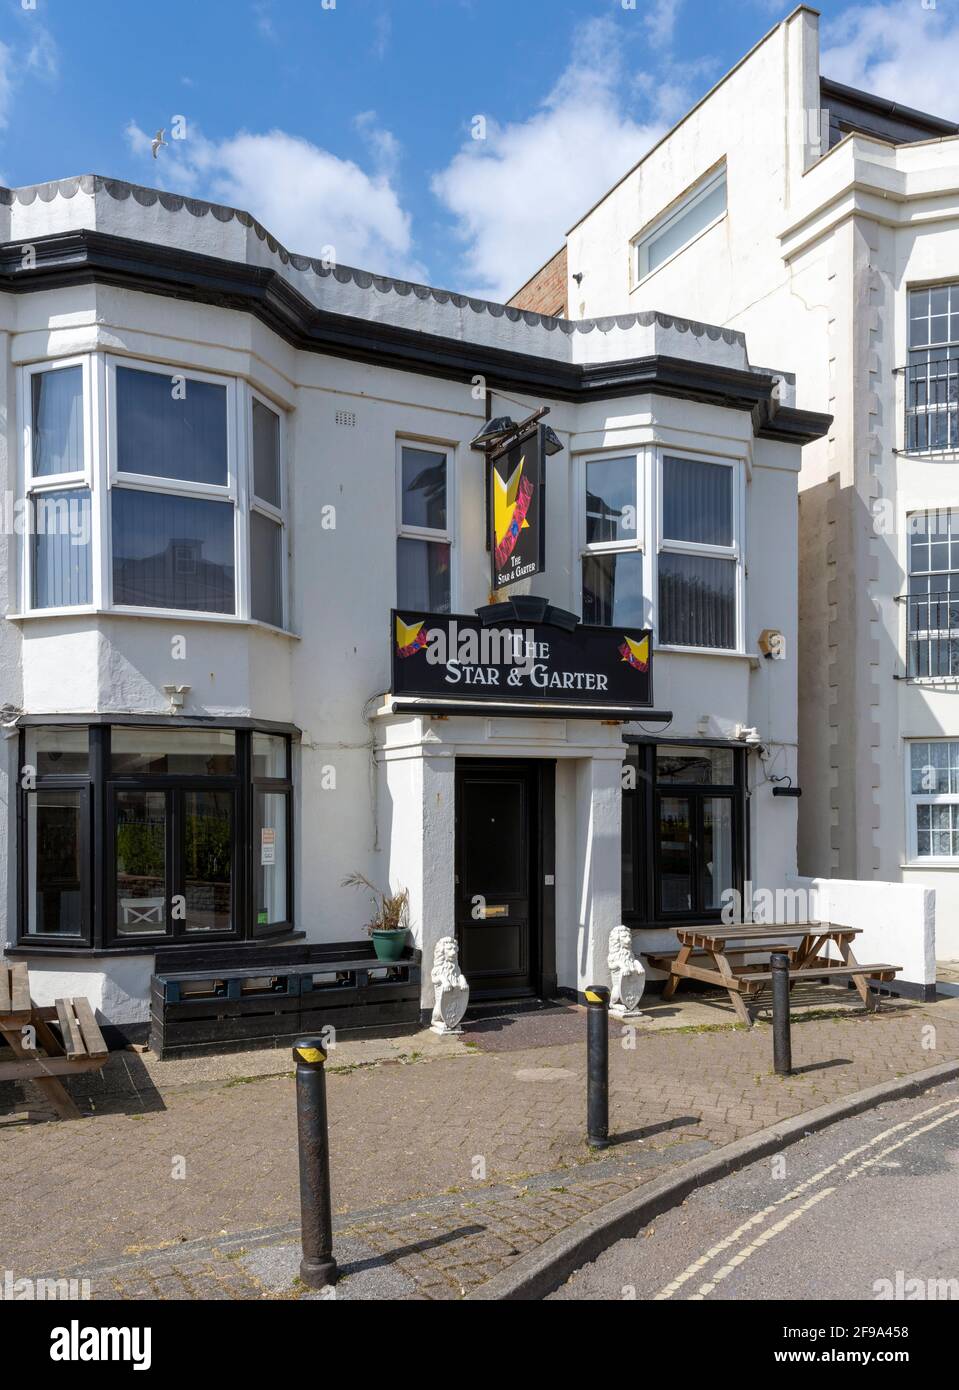 The Star and Garter public House, The Steyne, Bognor Regis, West Sussex, Angleterre,ROYAUME-UNI Banque D'Images